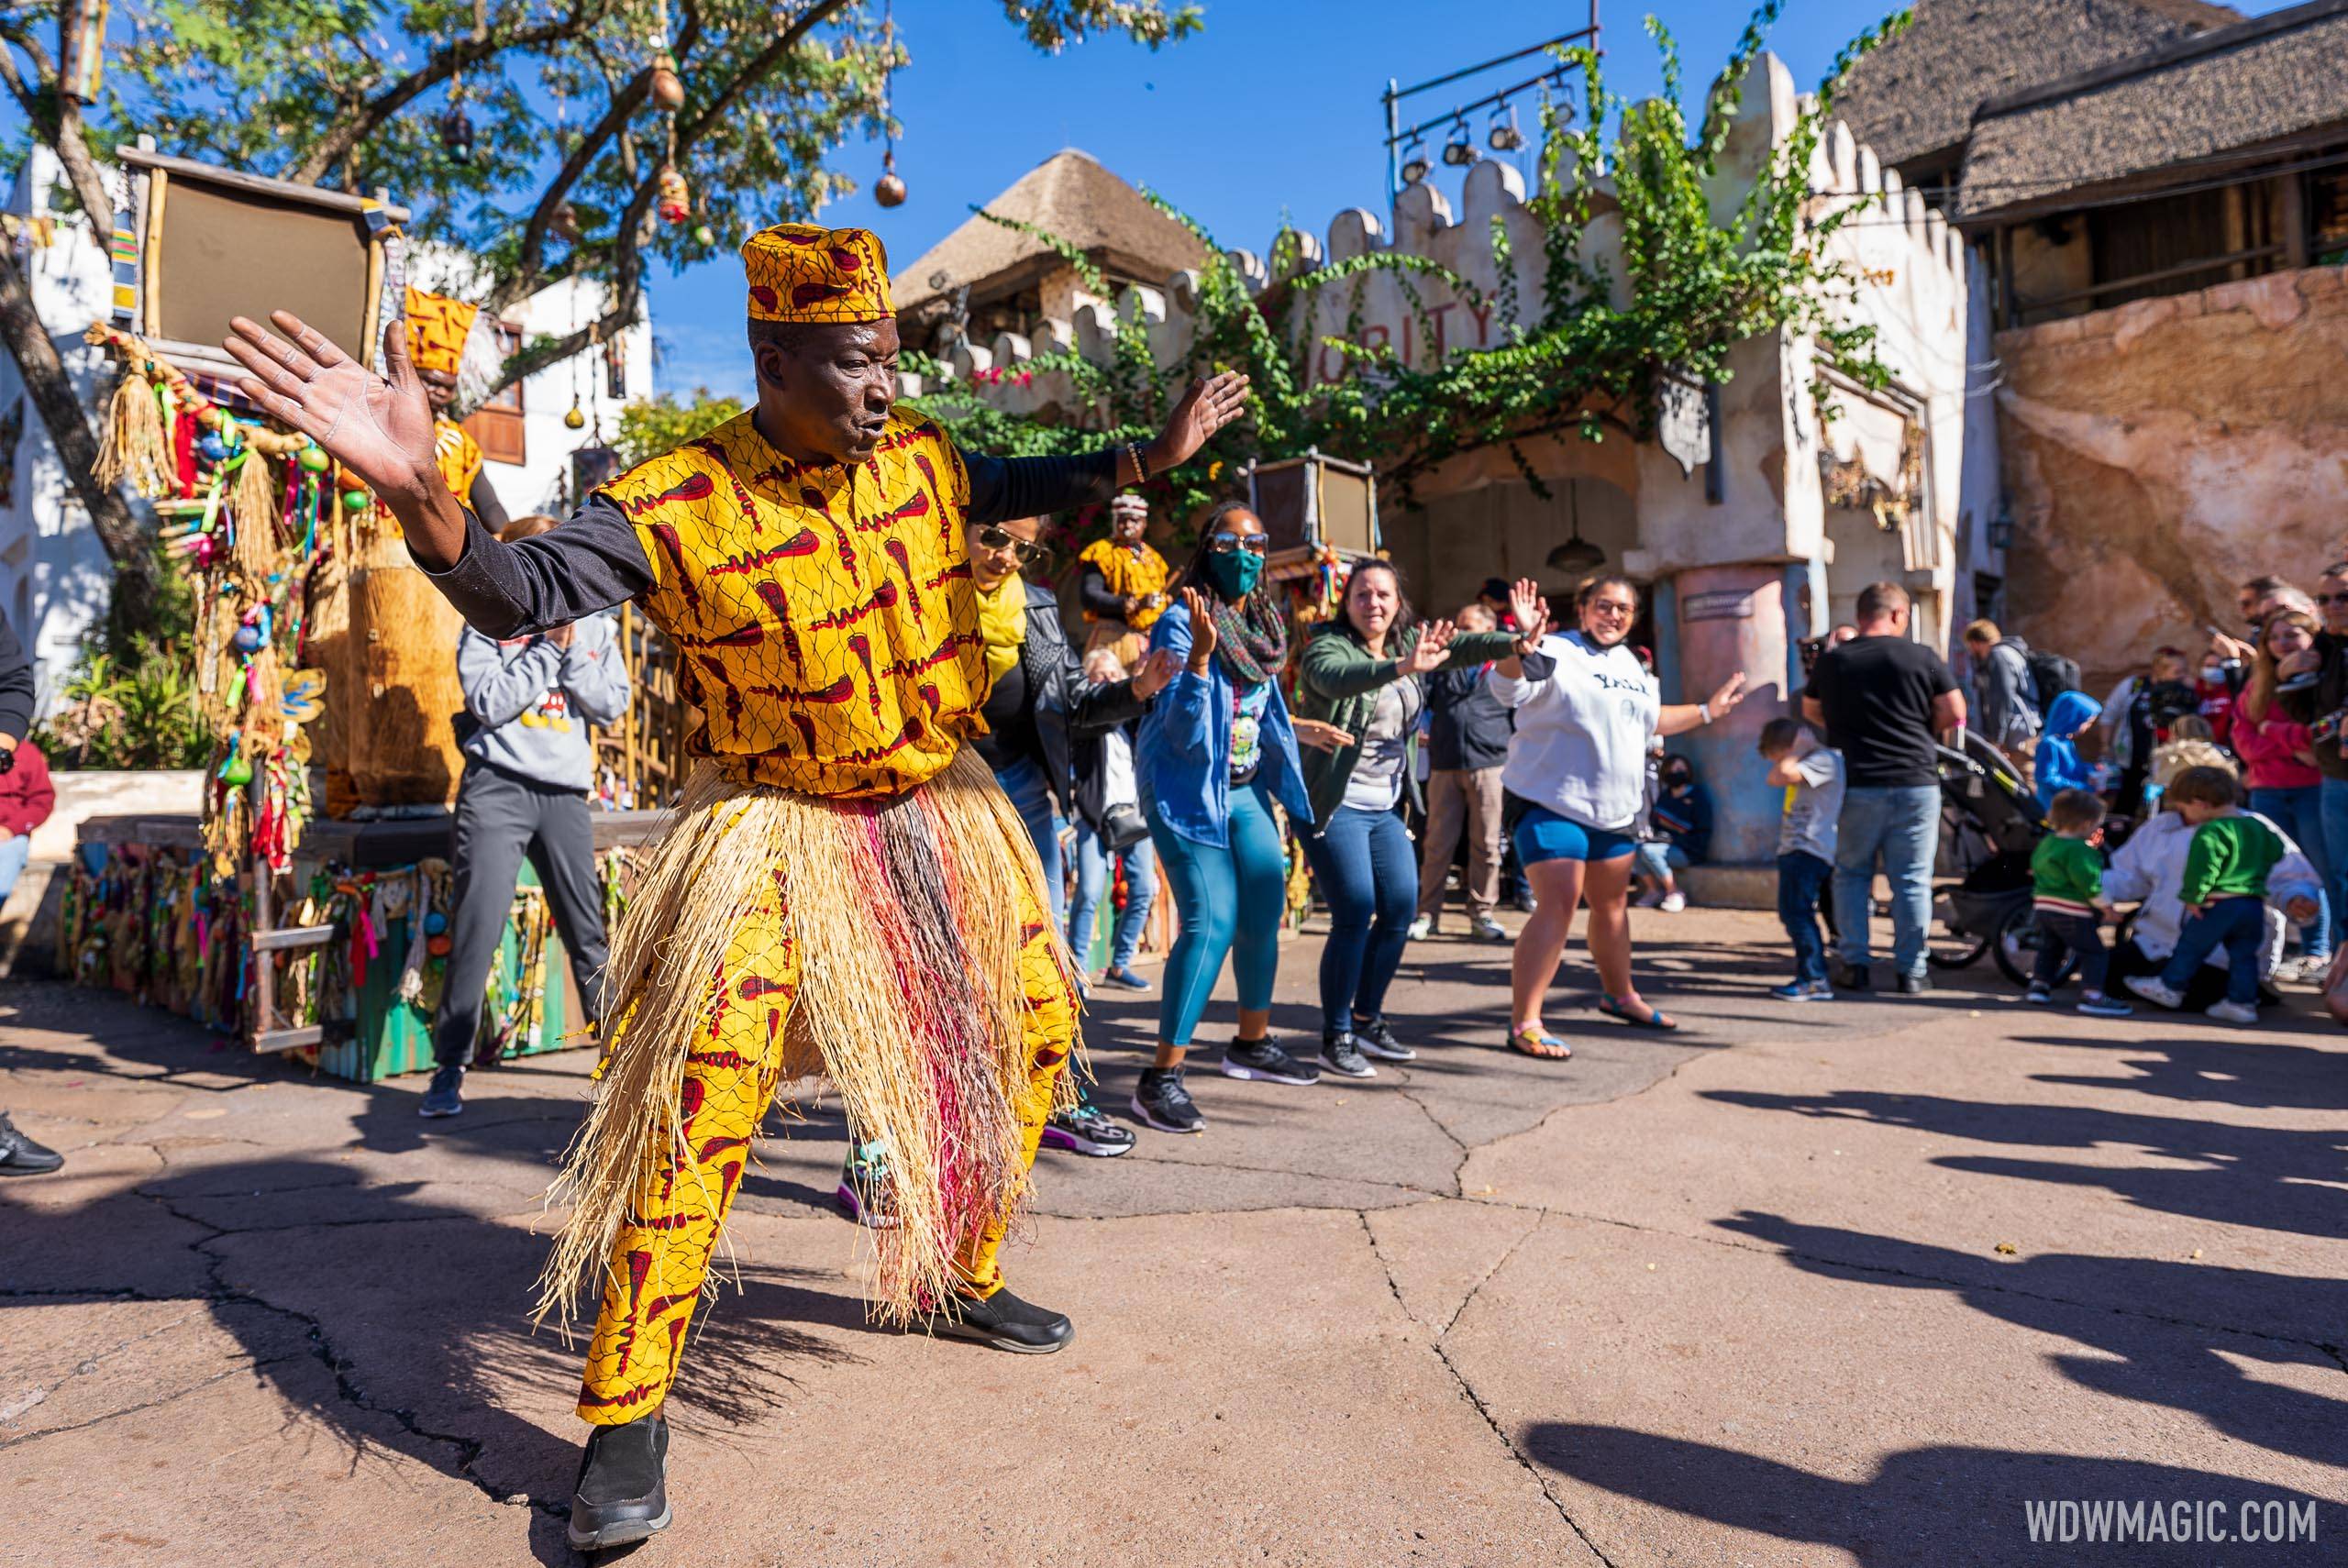 More live entertainment returns to Disney's Animal Kingdom with the Tam Tam Drummers